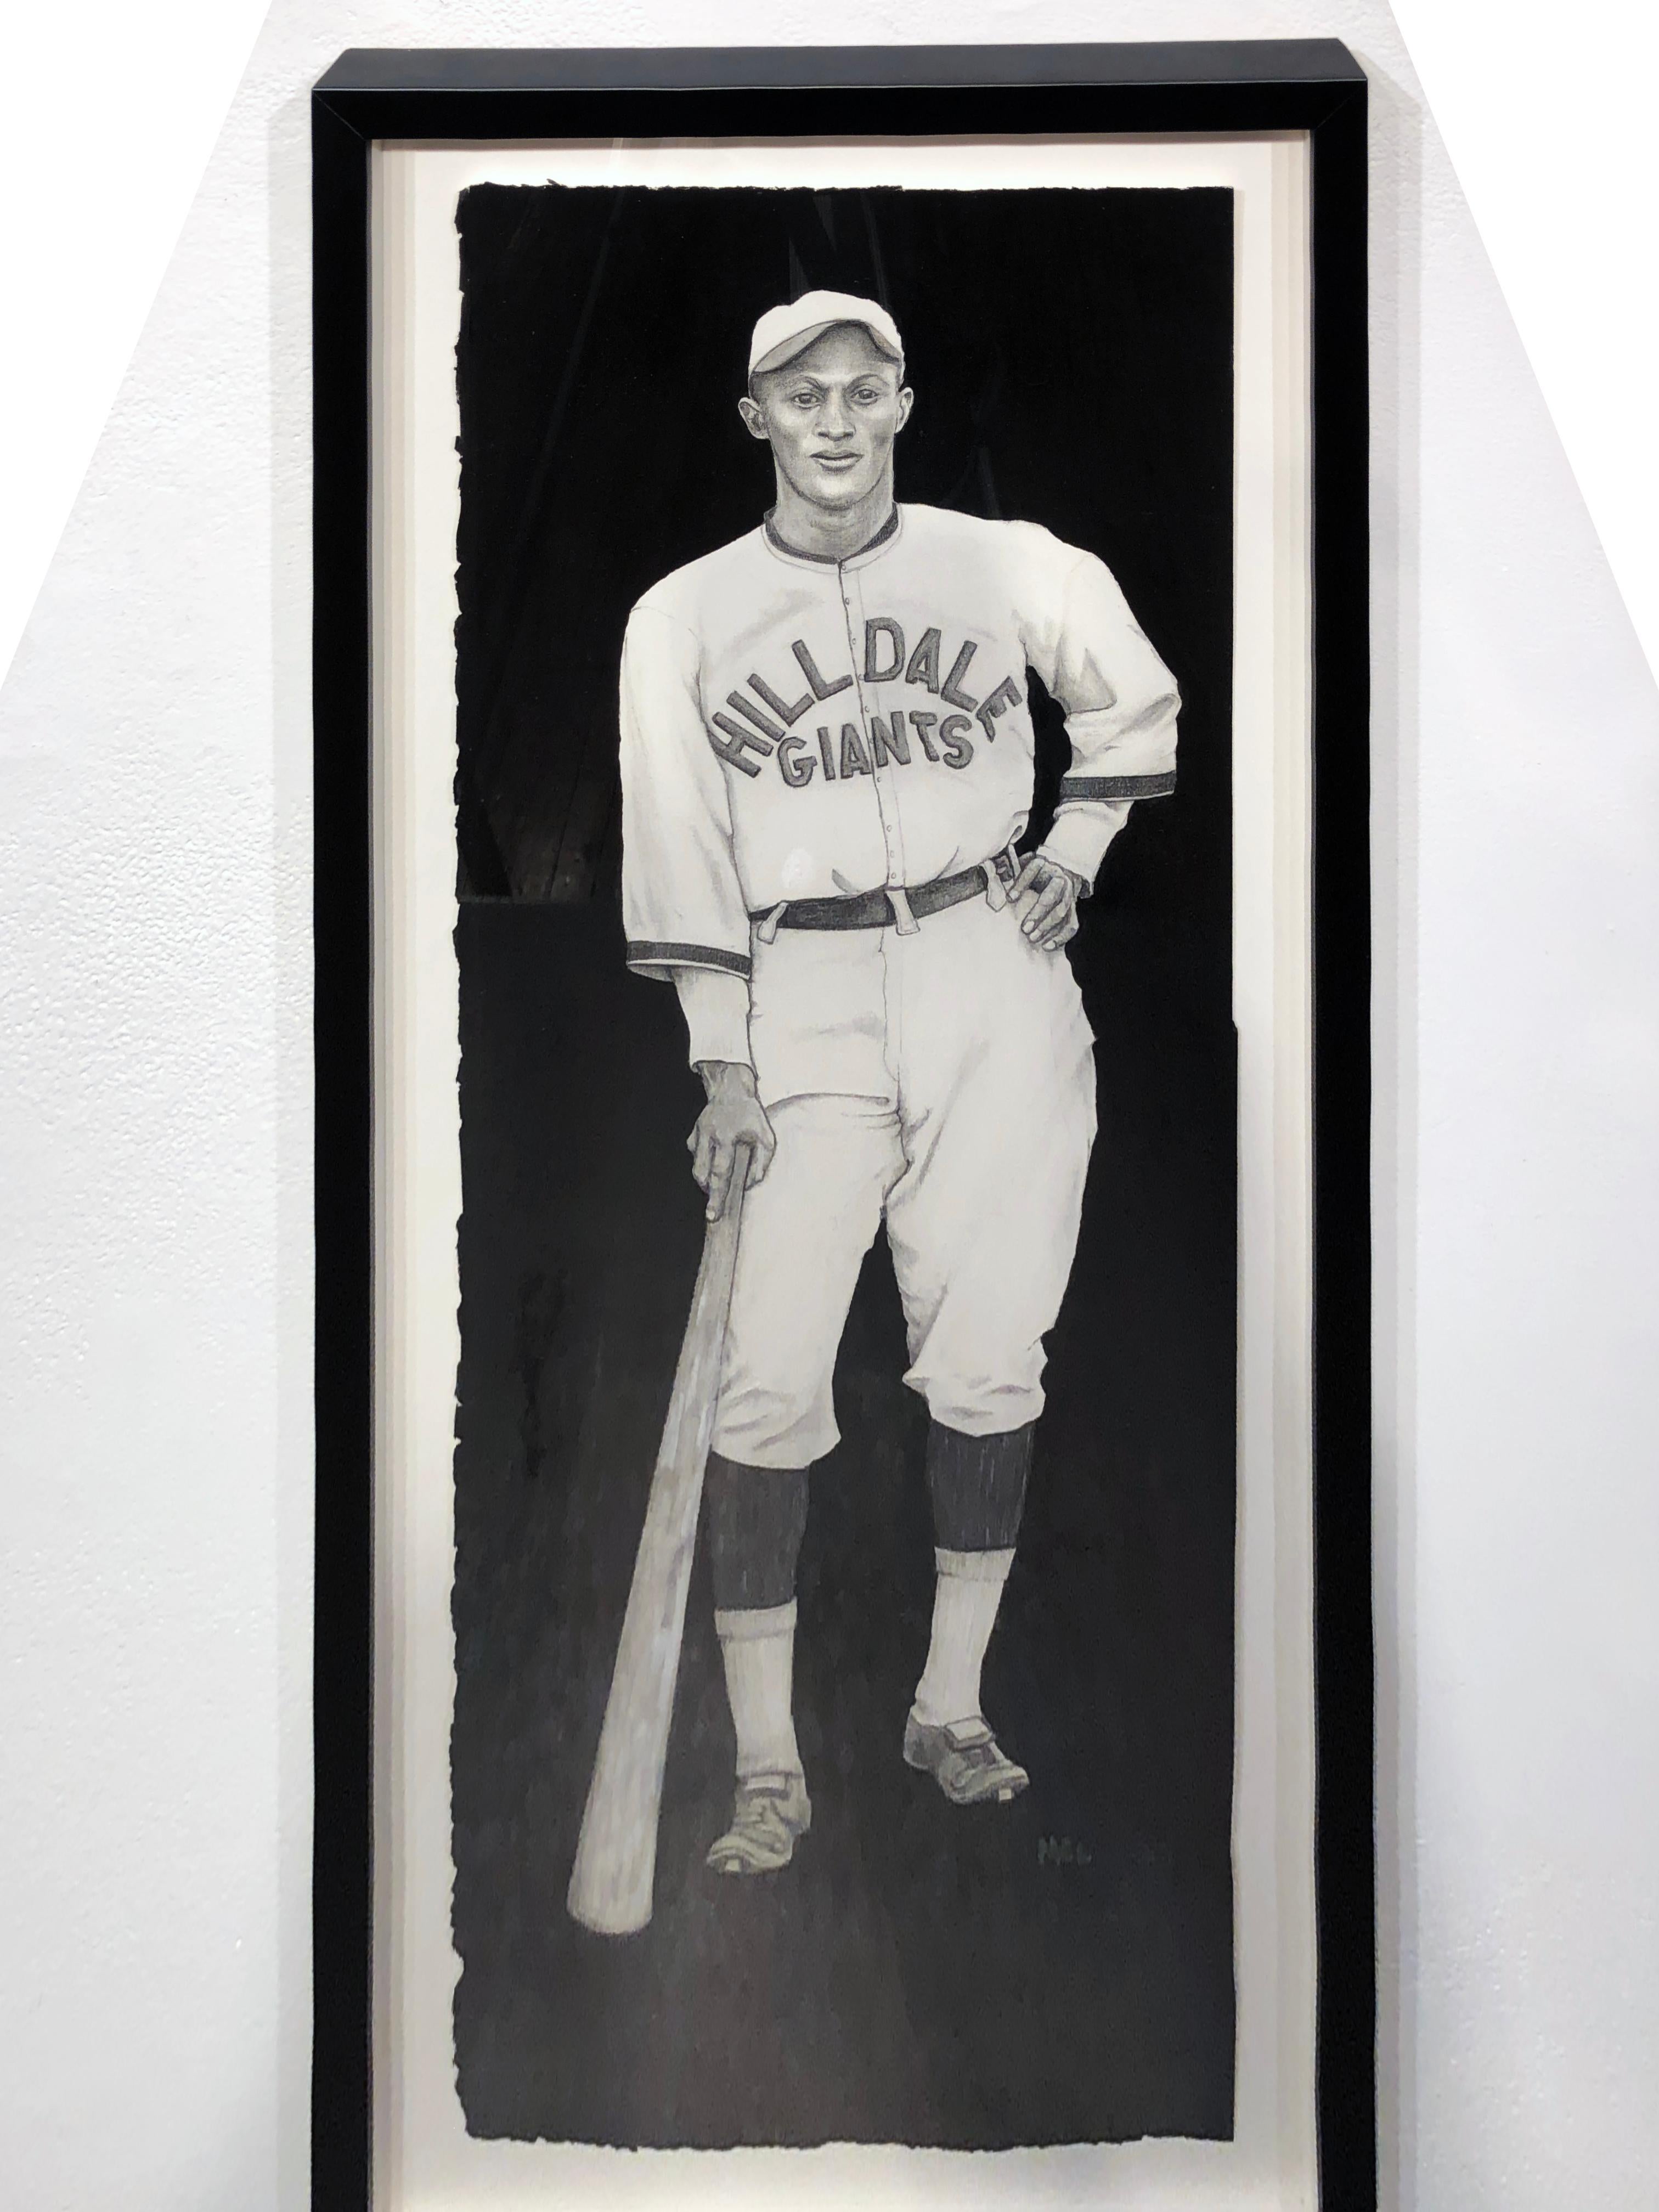 Herbert Alphonso Dixon, AKA Rap, was an outfielder for the Negro Baseball League on several different teams for a total of sixteen seasons.  He had the honor of being the first African American player to hit a home run at the famed Yankee Stadium in